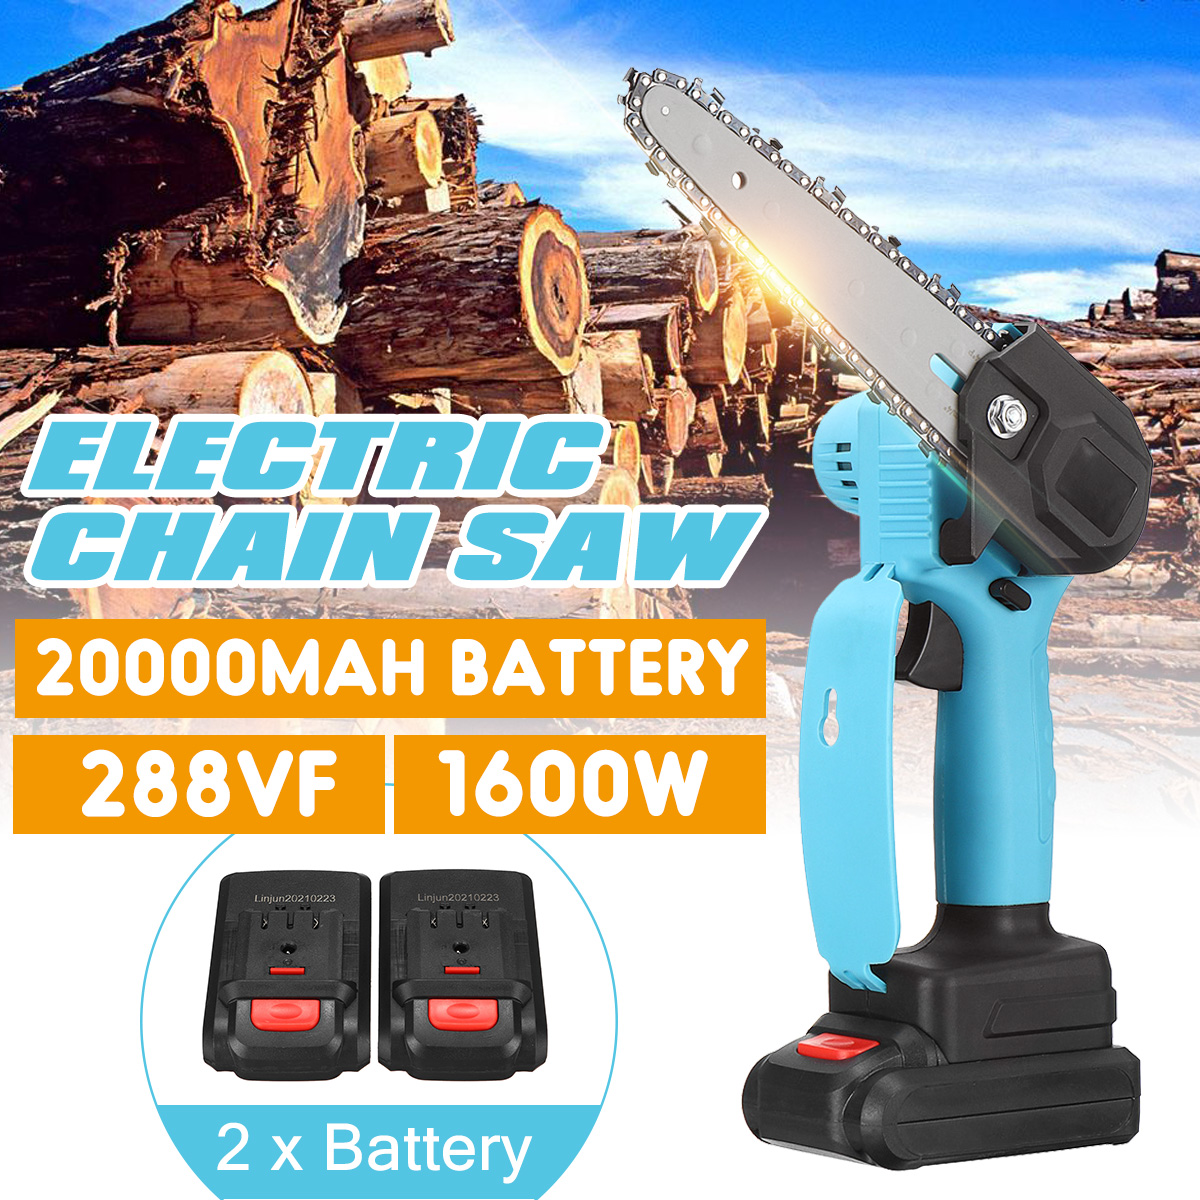 1600W-6Inch-24V-Rechargeable-Electric-Chain-Saw-Handheld-Mini-Chainsaw-Woodworking-Cutter-Tool-W-12p-1833049-1